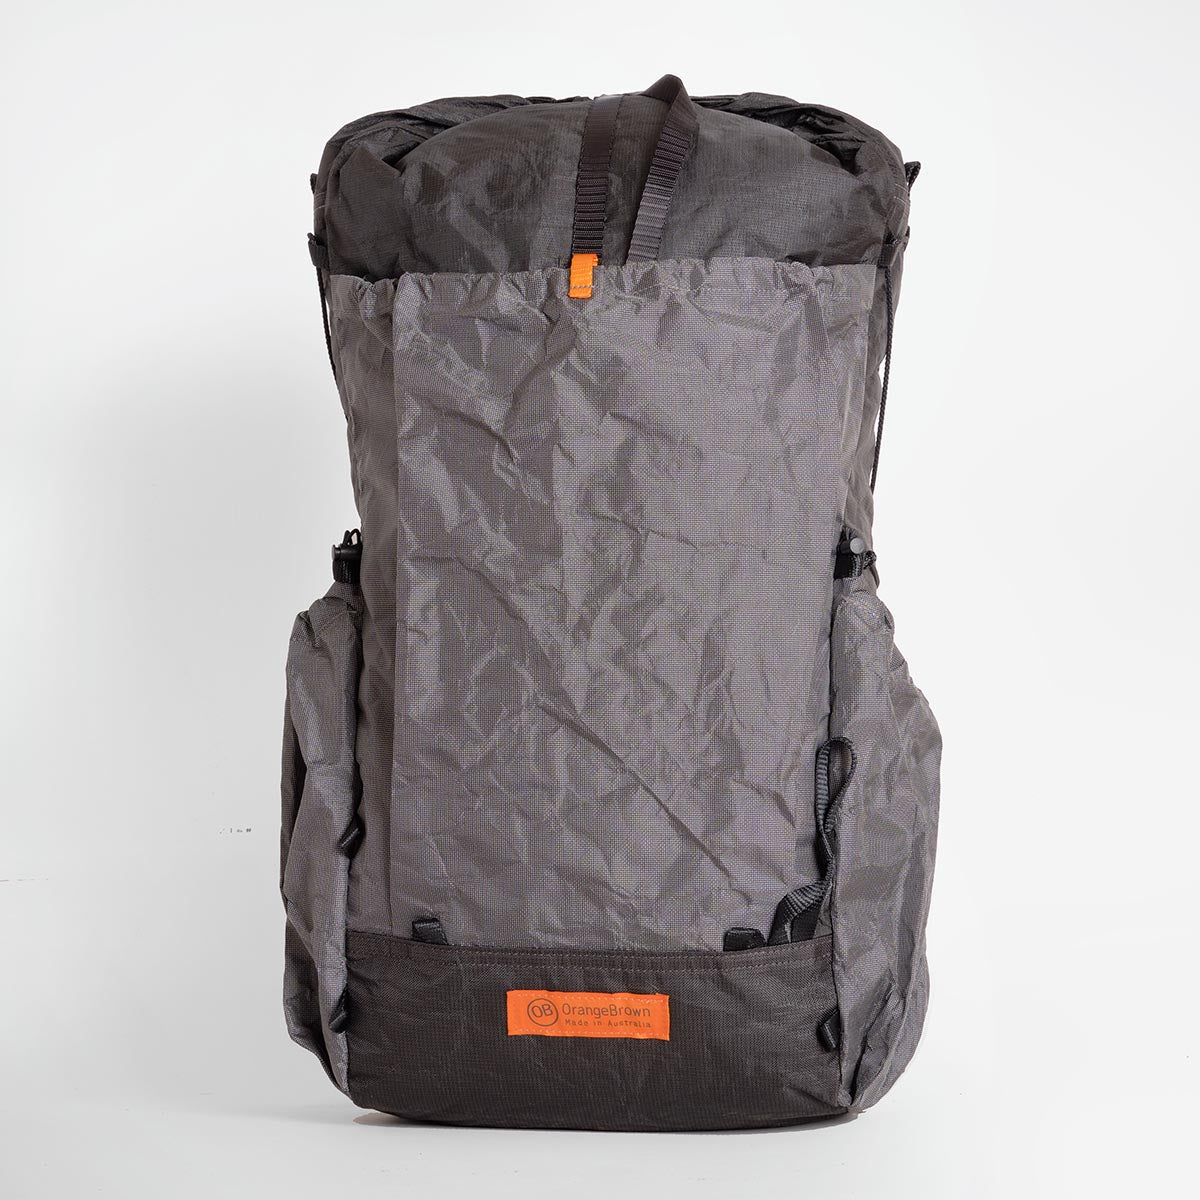 OrangeBrown backpack OB30.  A lightweight backpack with side pockets able to hold two 1 Litre bottles each. Made in Australia from Challenge Ultra fabrics.